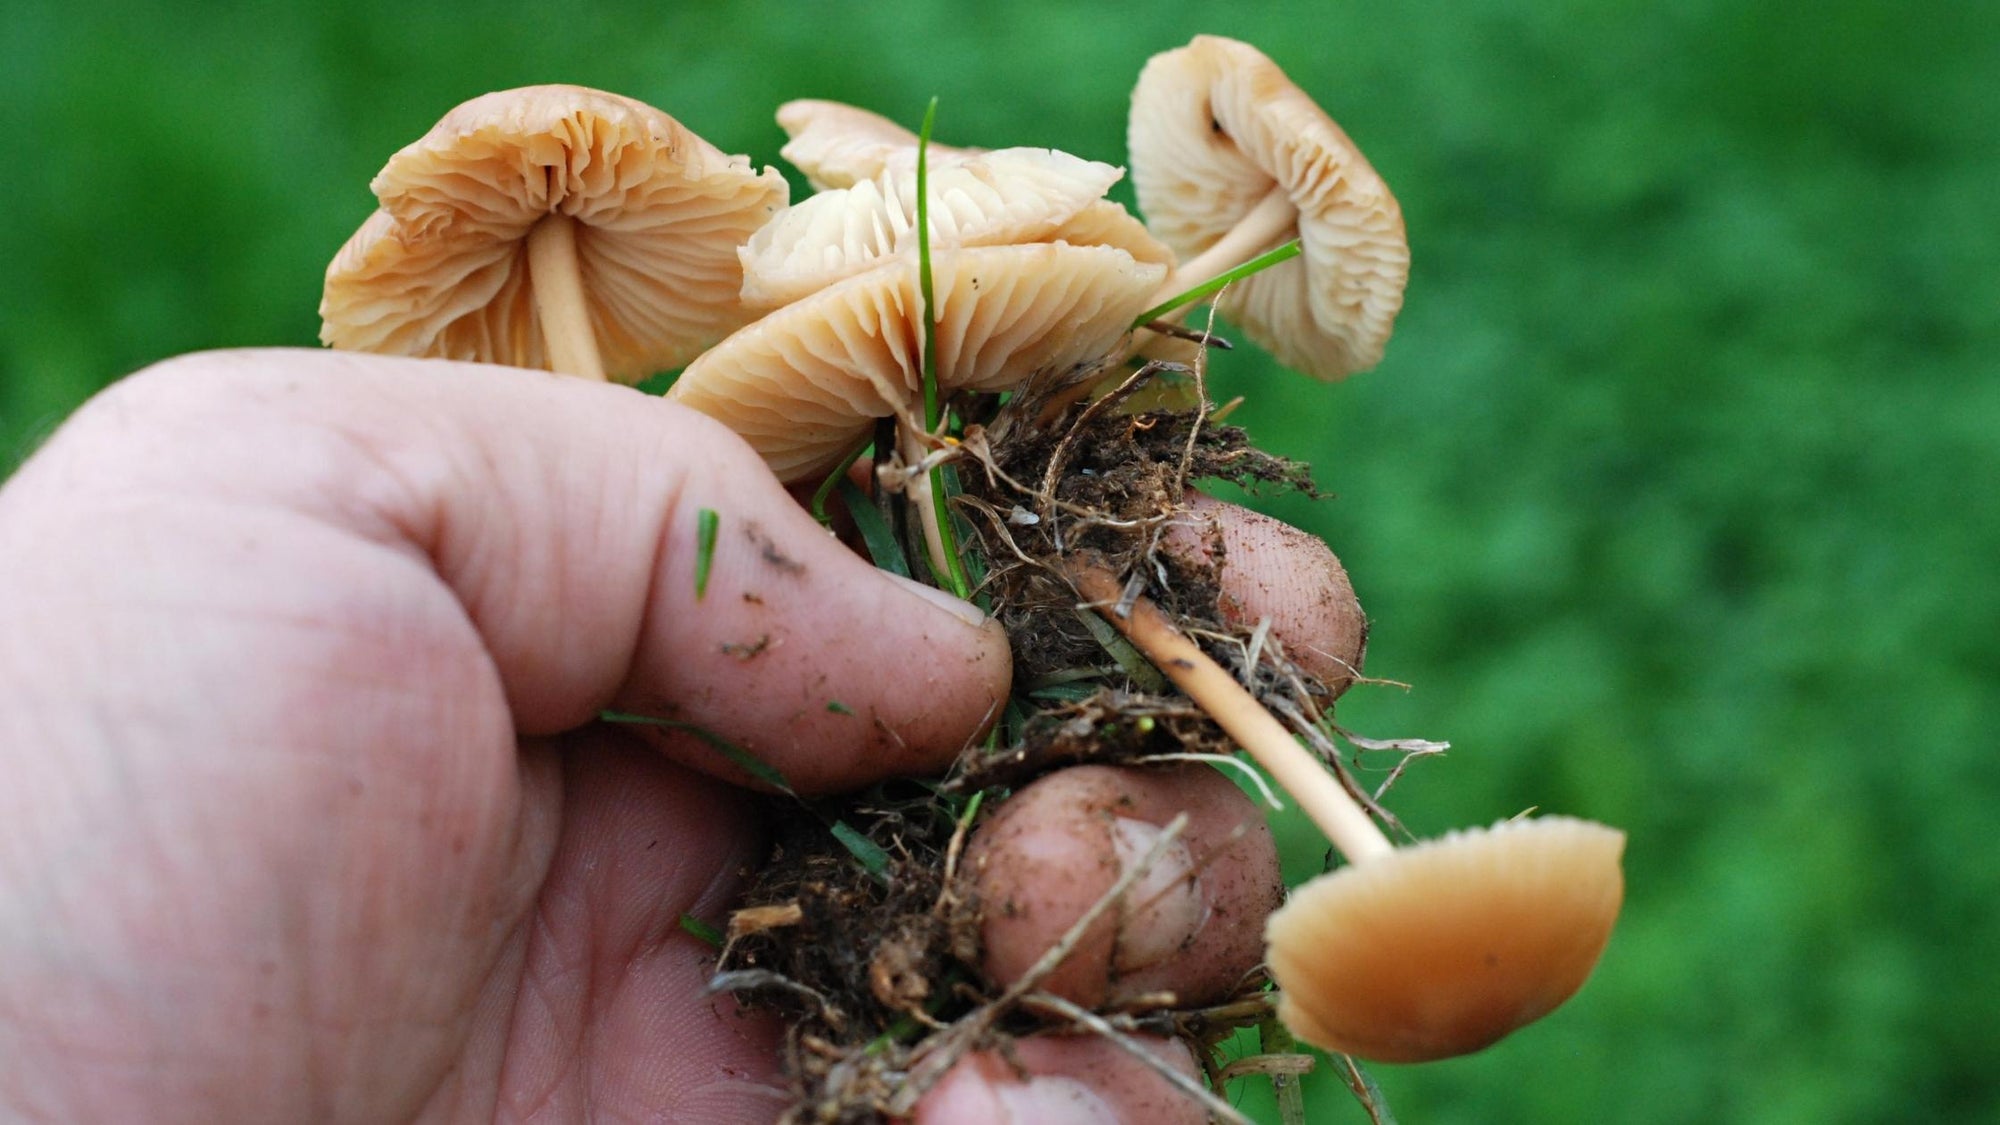 Why are Mushrooms Important to the Food Chain?